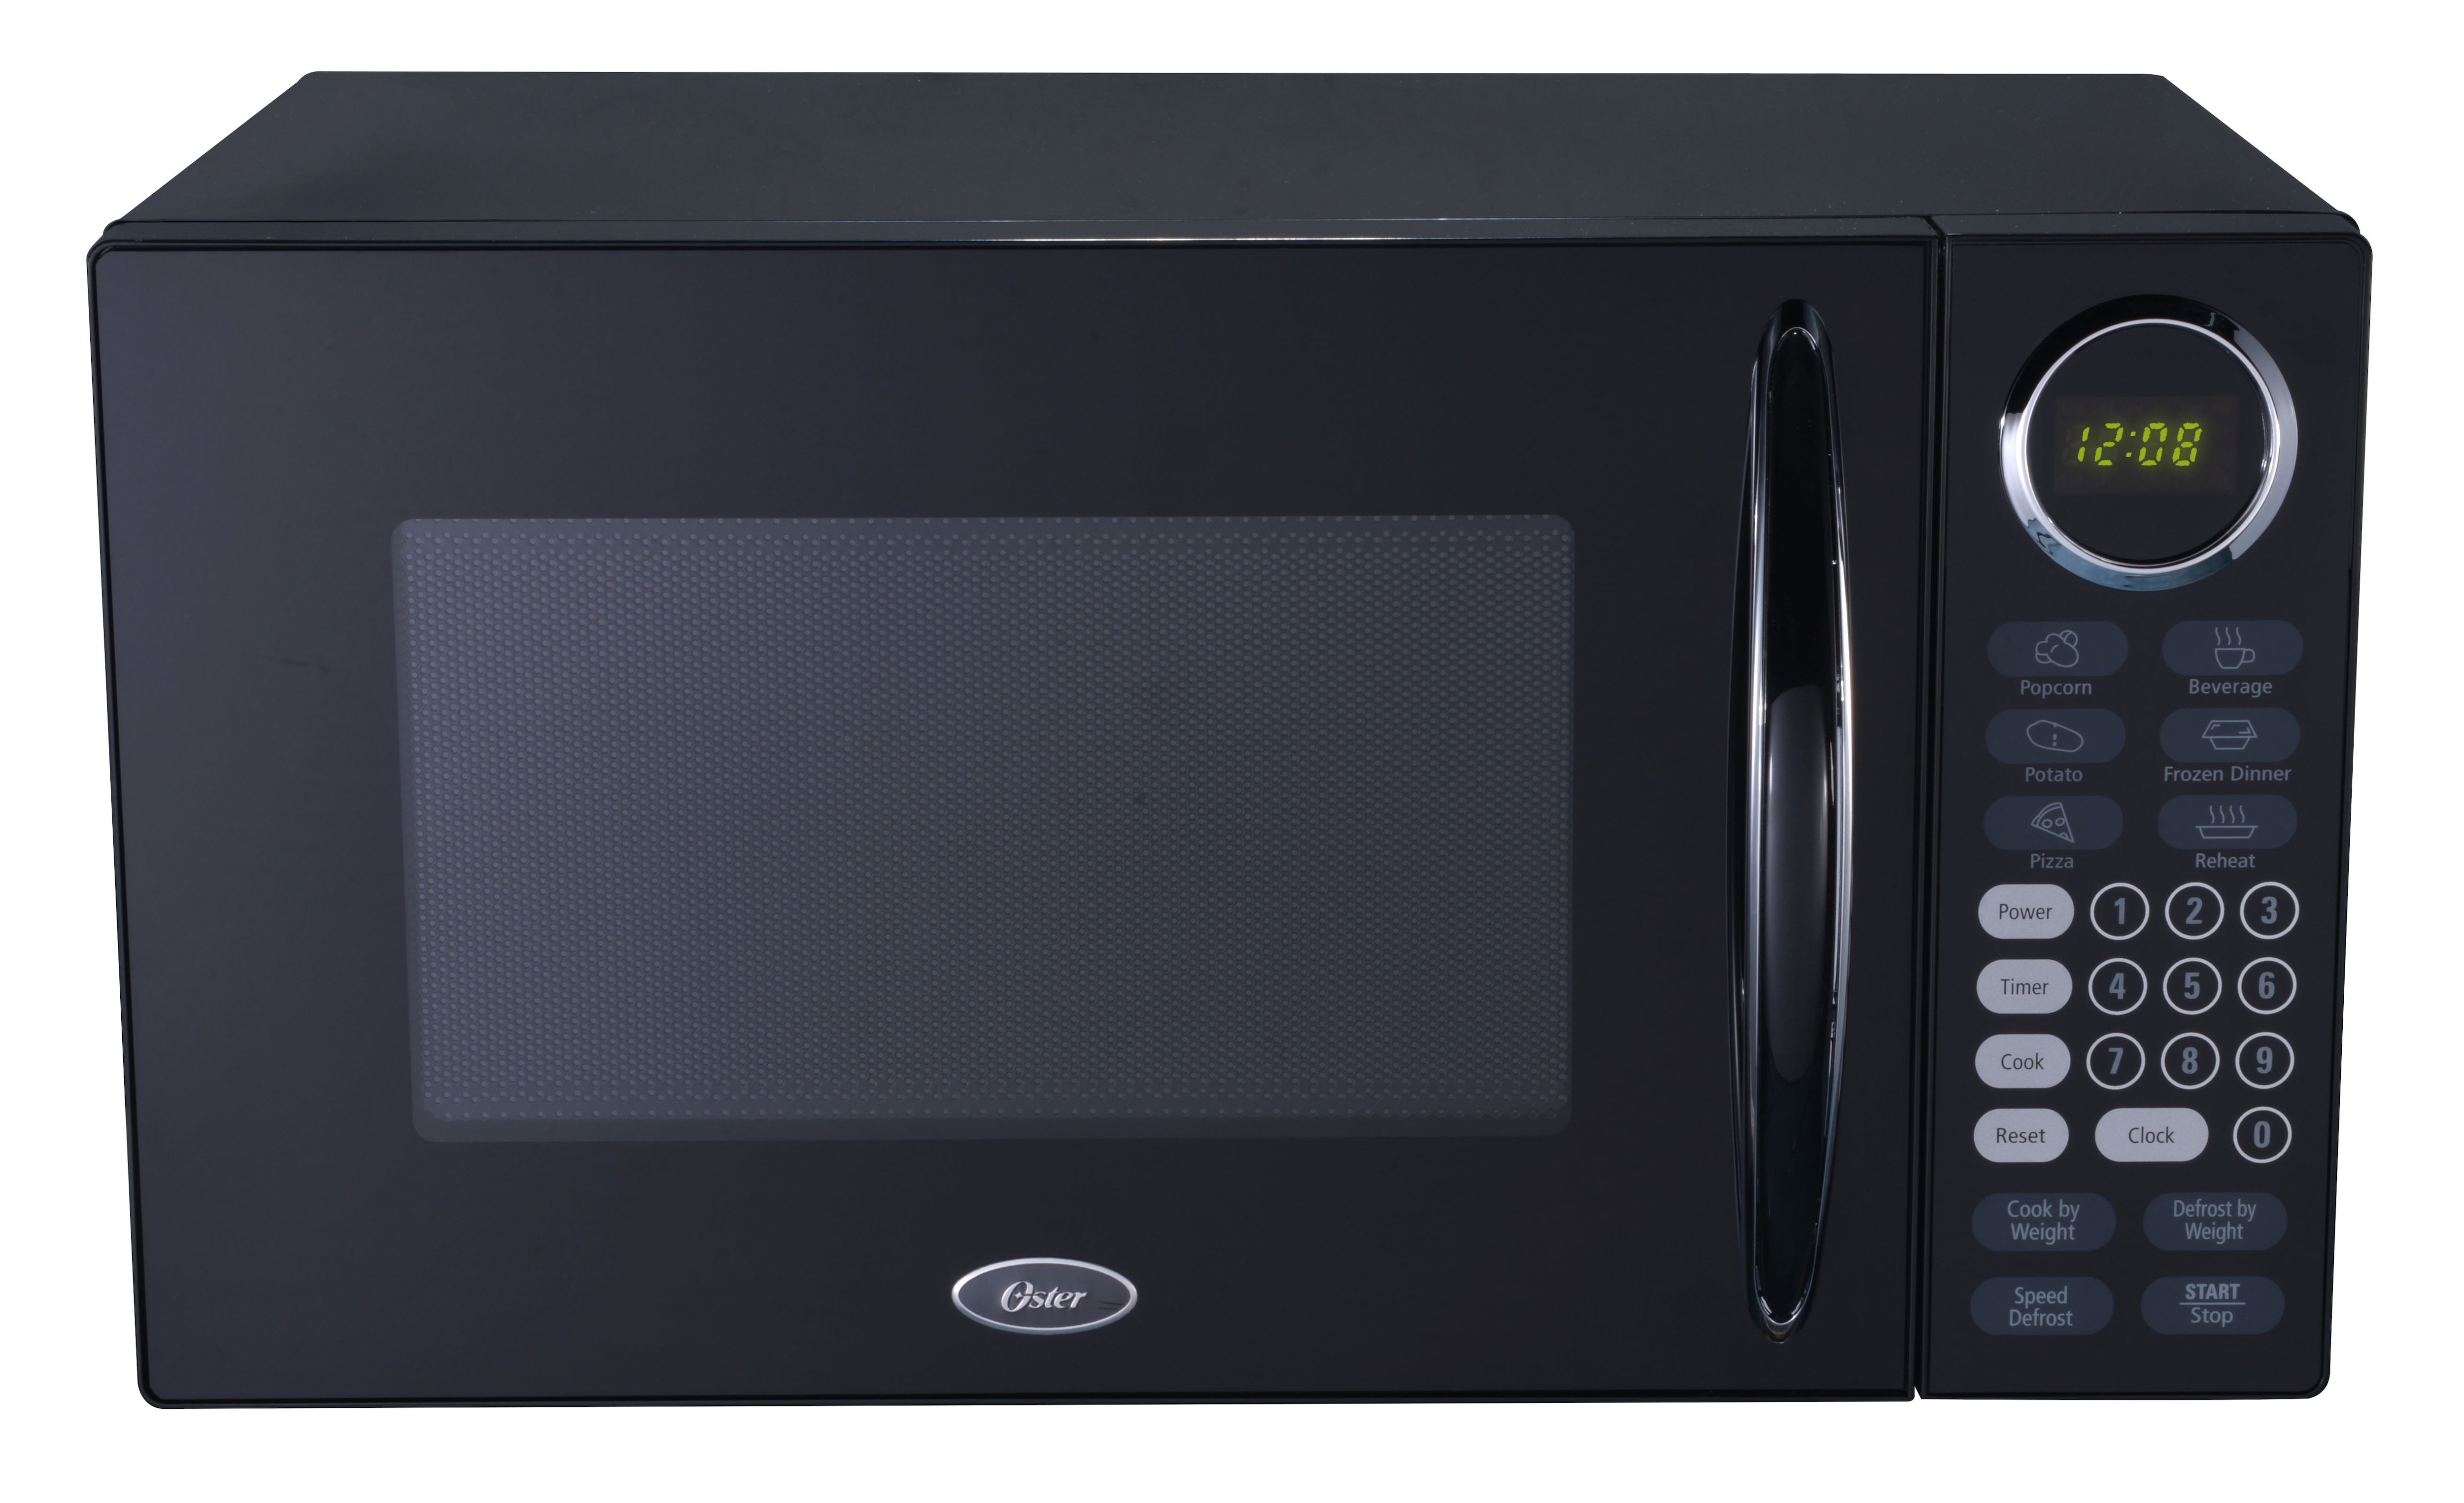 Oster 0.9 Cu. Ft. Compact Microwave Black OGB8902-B - Best Buy